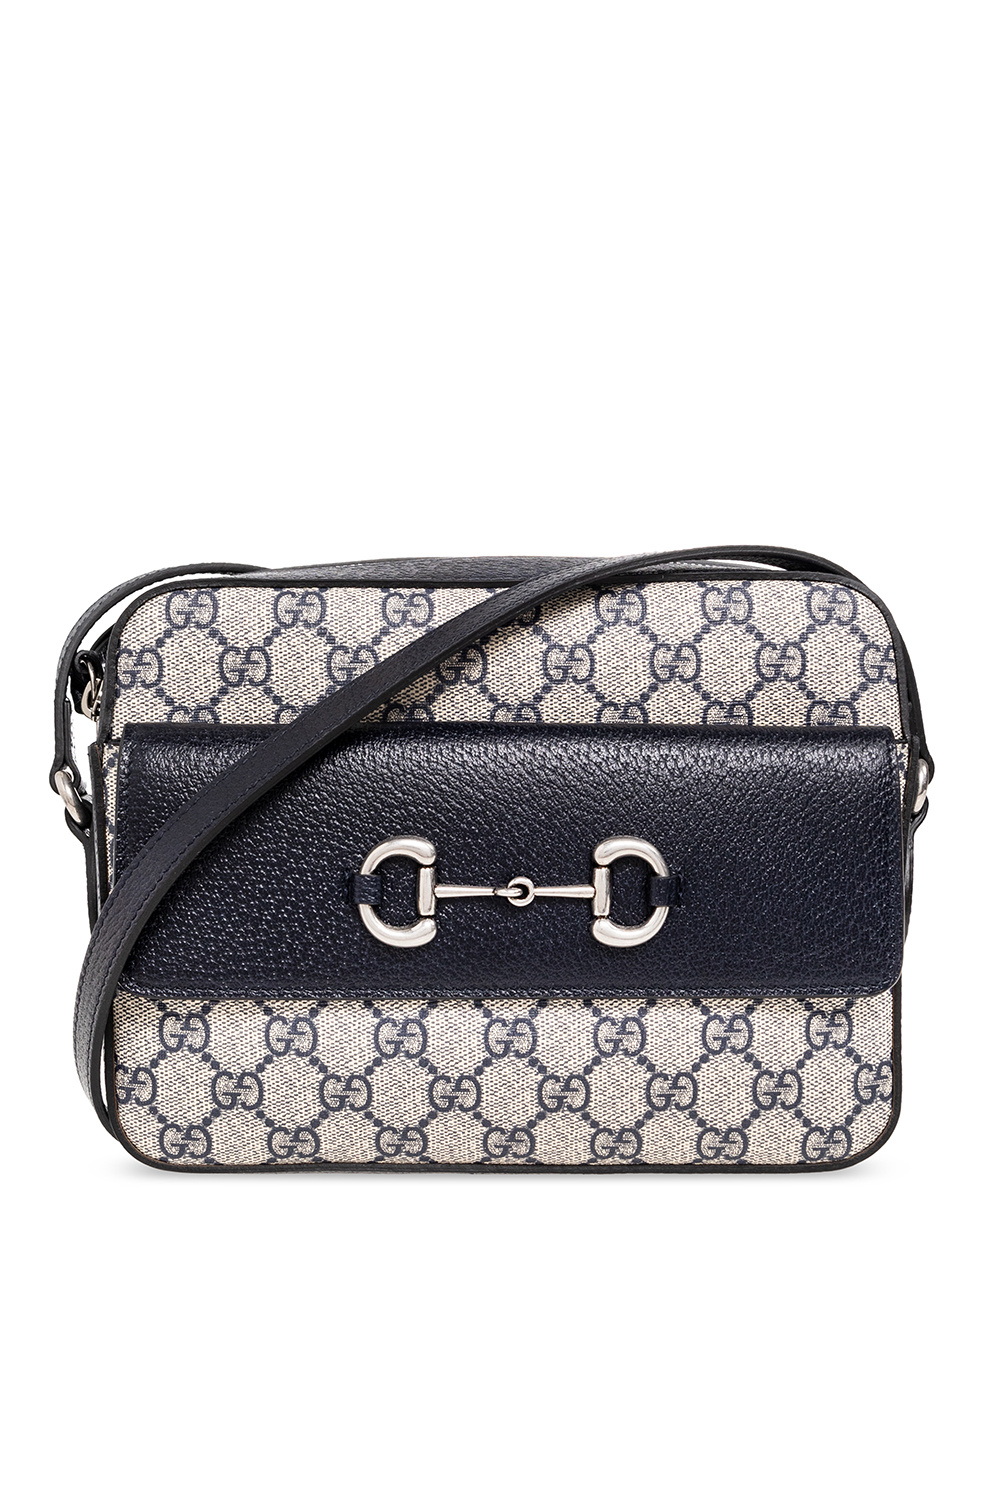 Gucci, Bags, Gucci Zip Around Original Gg Canvas With White Leather Trim  French Pouch Wallet